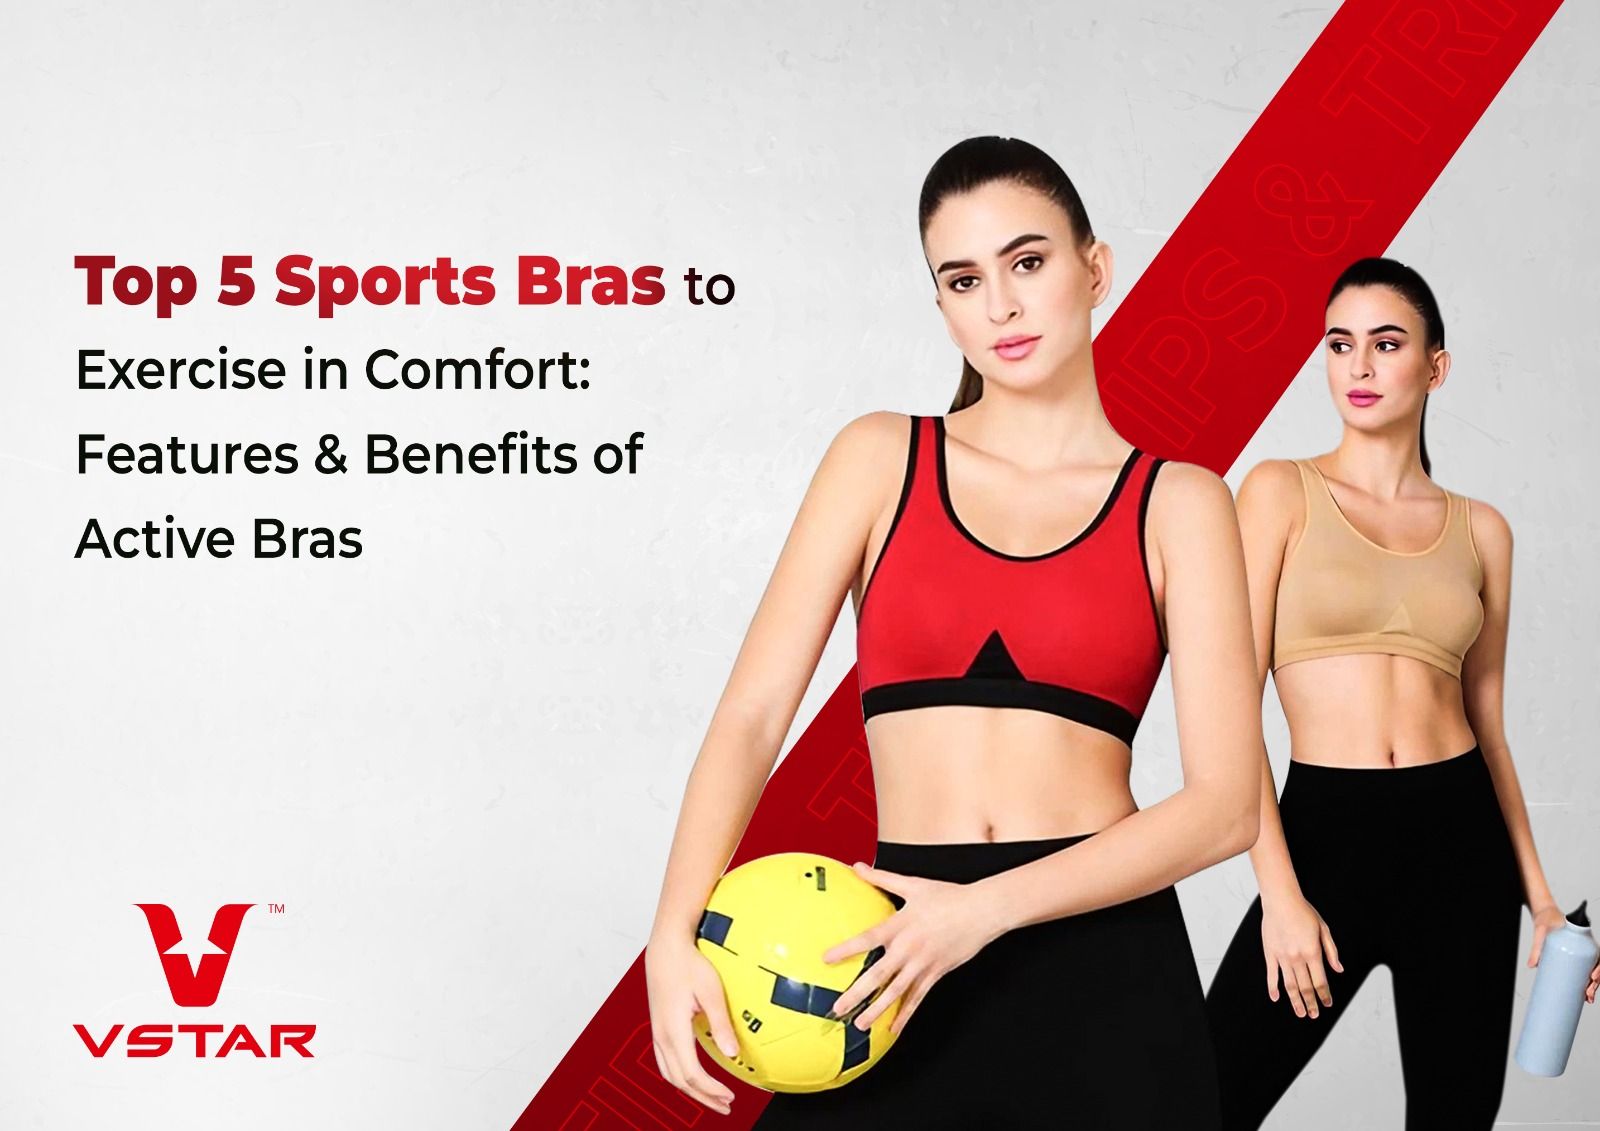 https://www.vstar.in/media//mageplaza/blog/post/t/o/top_5_sports_bras_to_exercise_in_comfort_features_benefits_of_active_bras.jpg